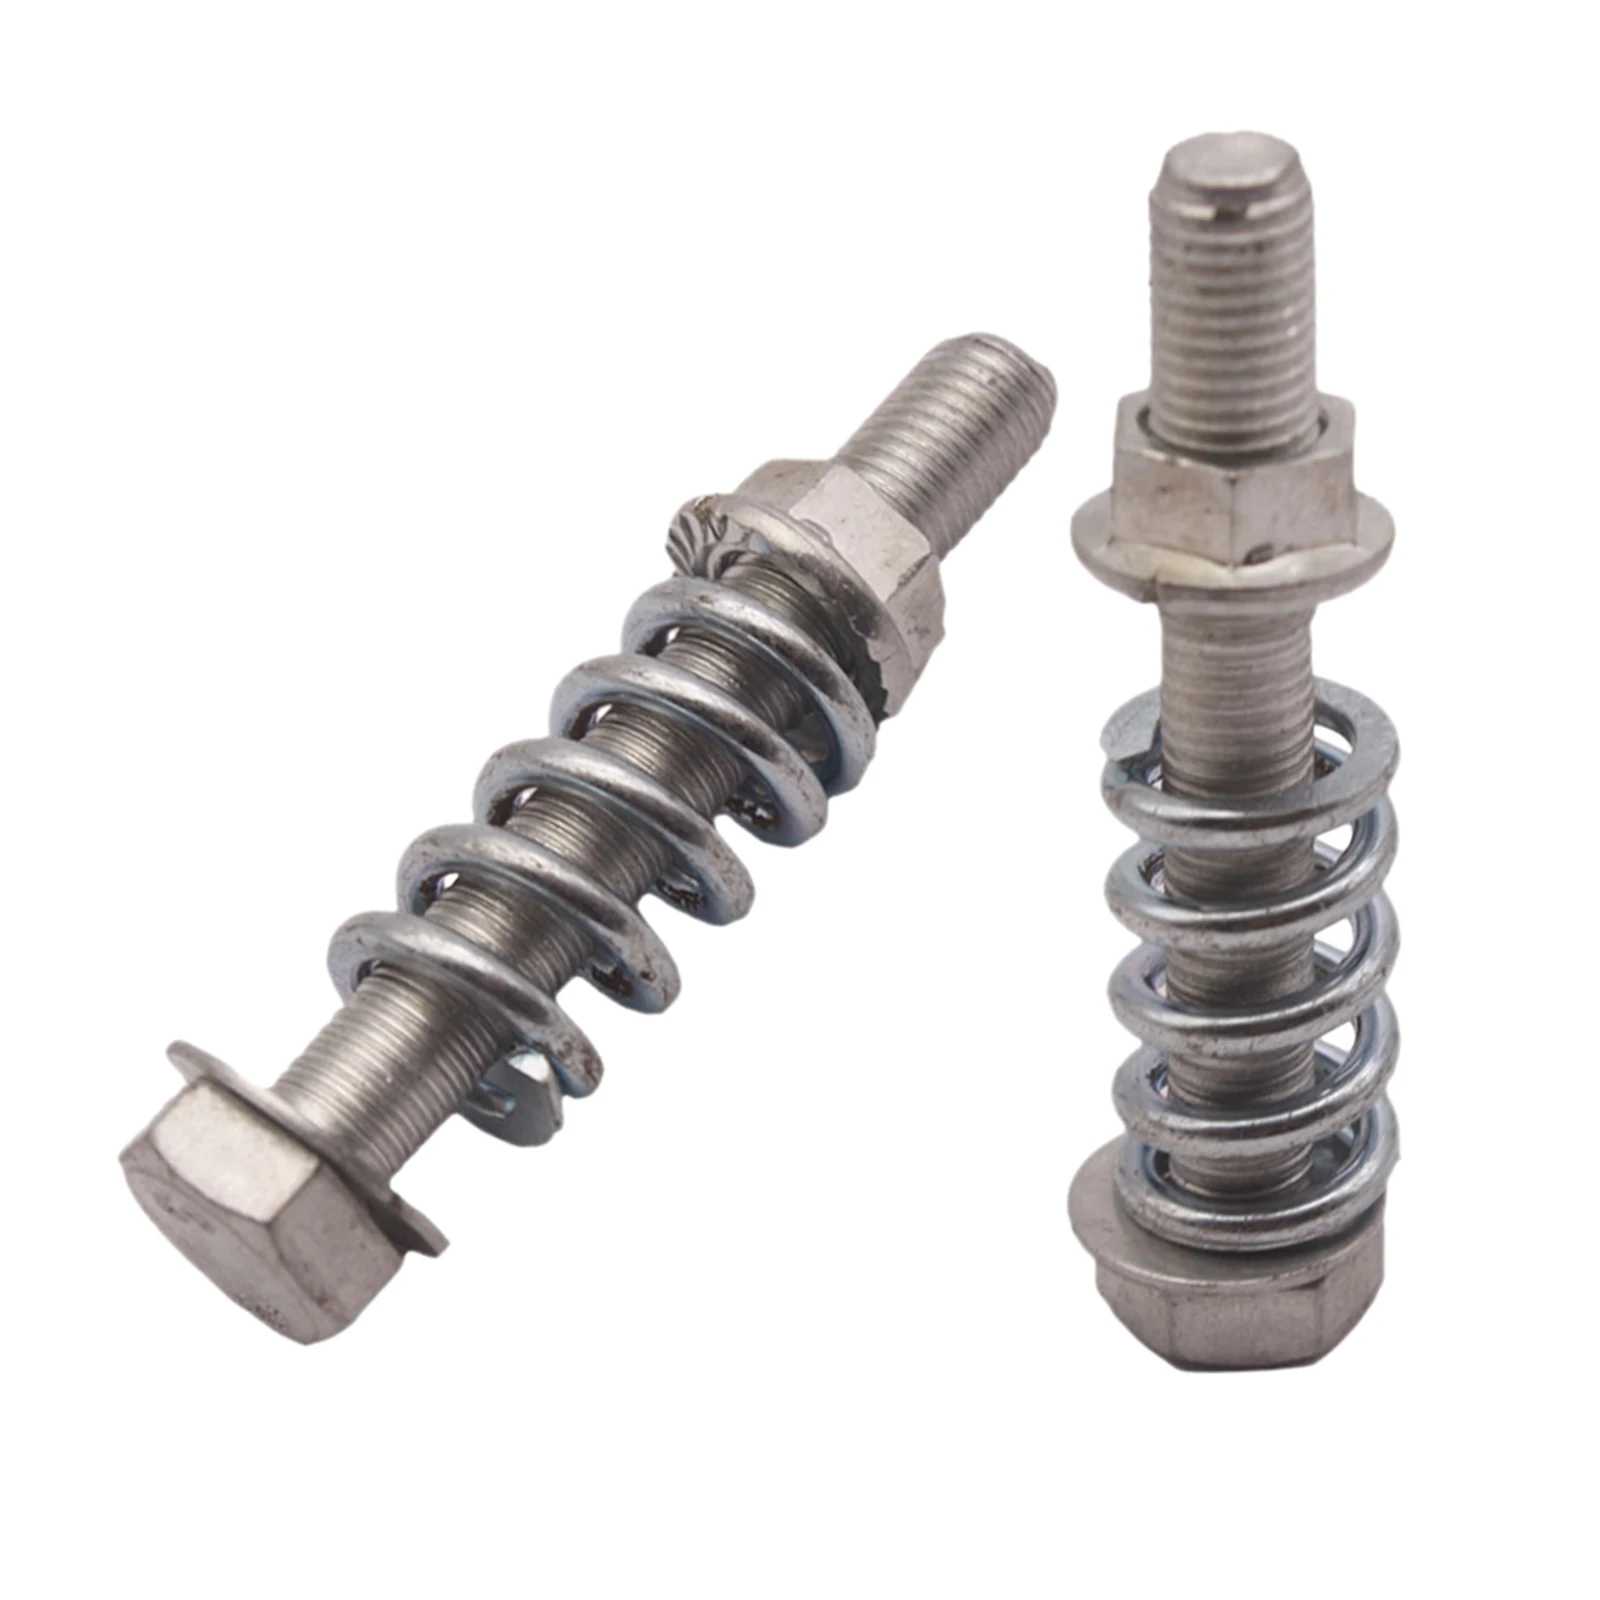 2x M10x1.5 Exhaust Bolt and Spring Set Replacement High quality Accessories